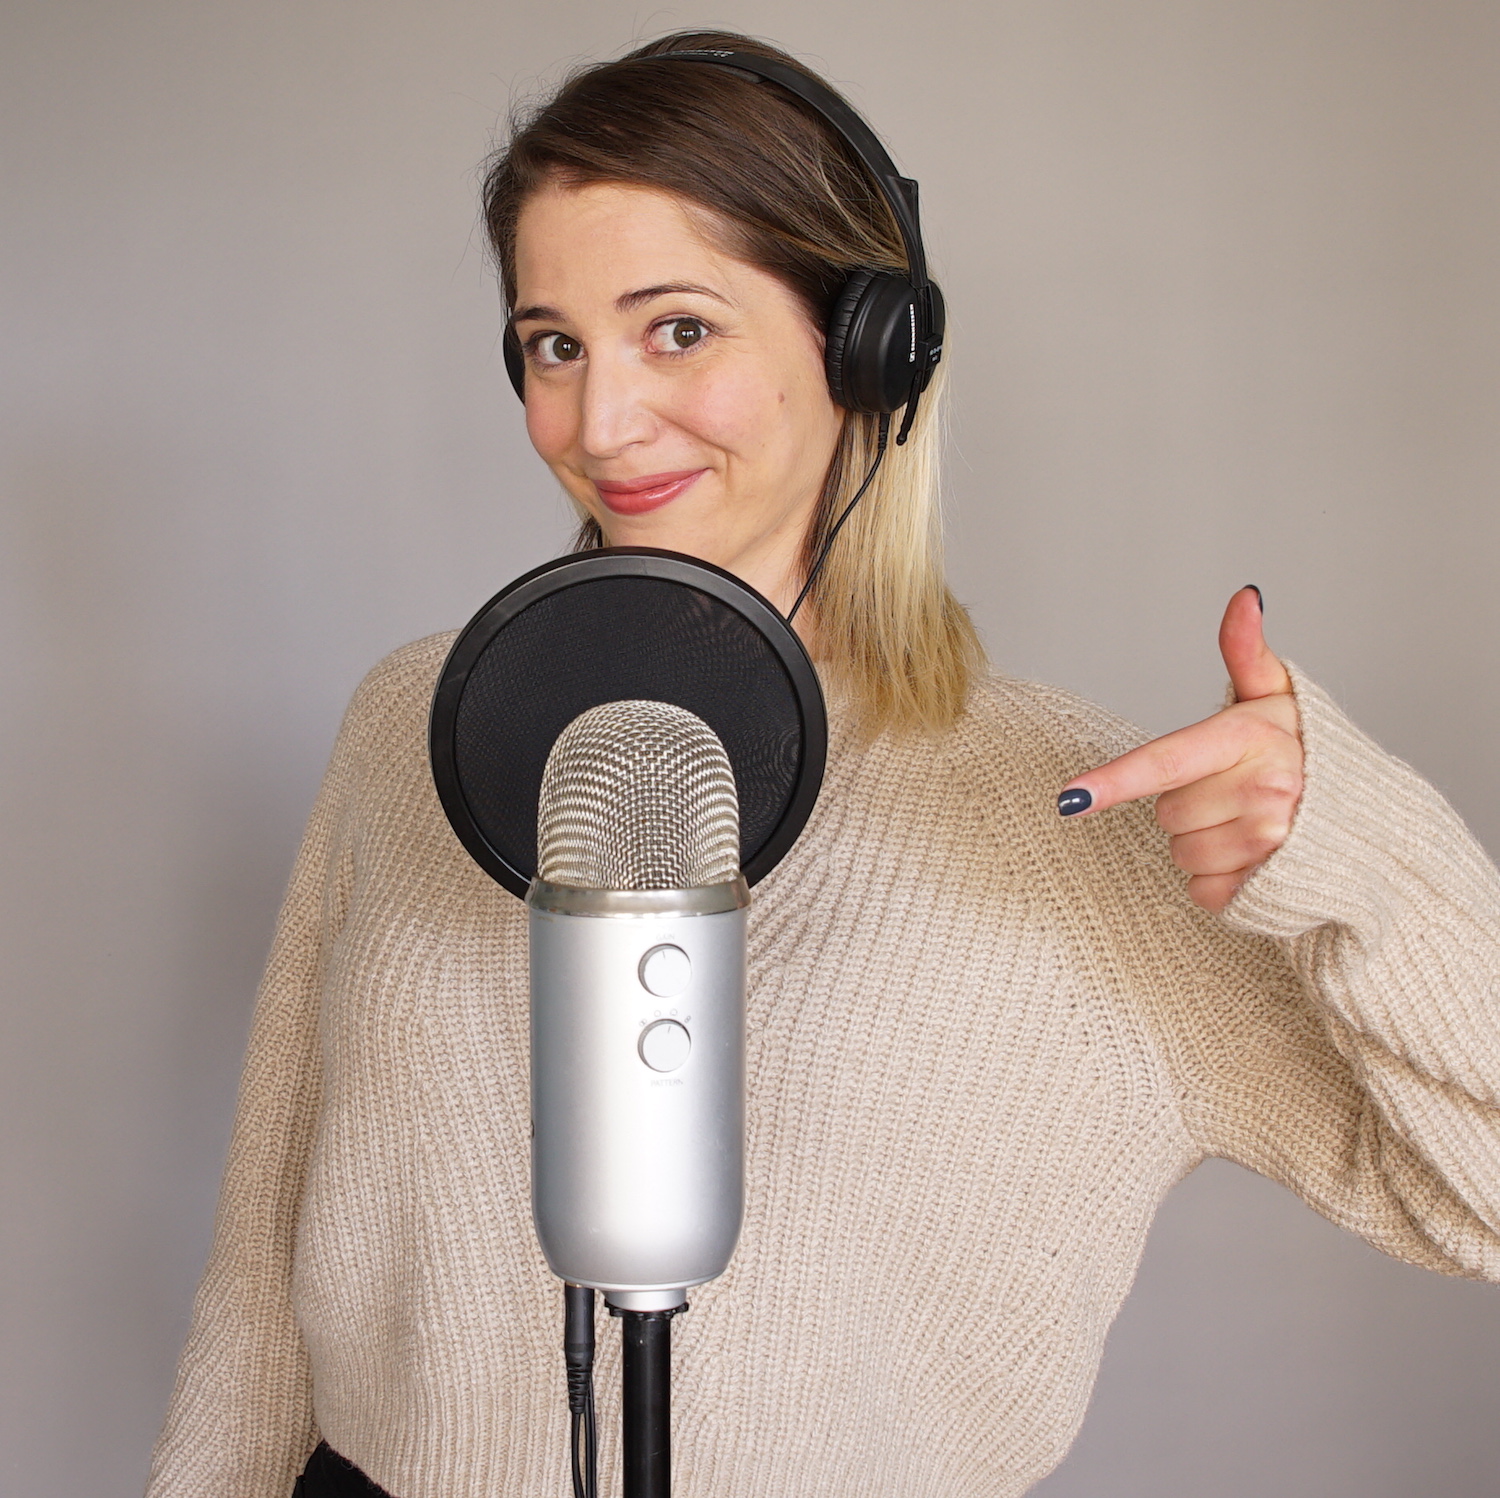 Emily milling pointing at blue yeti mirophone wearing beige sweater